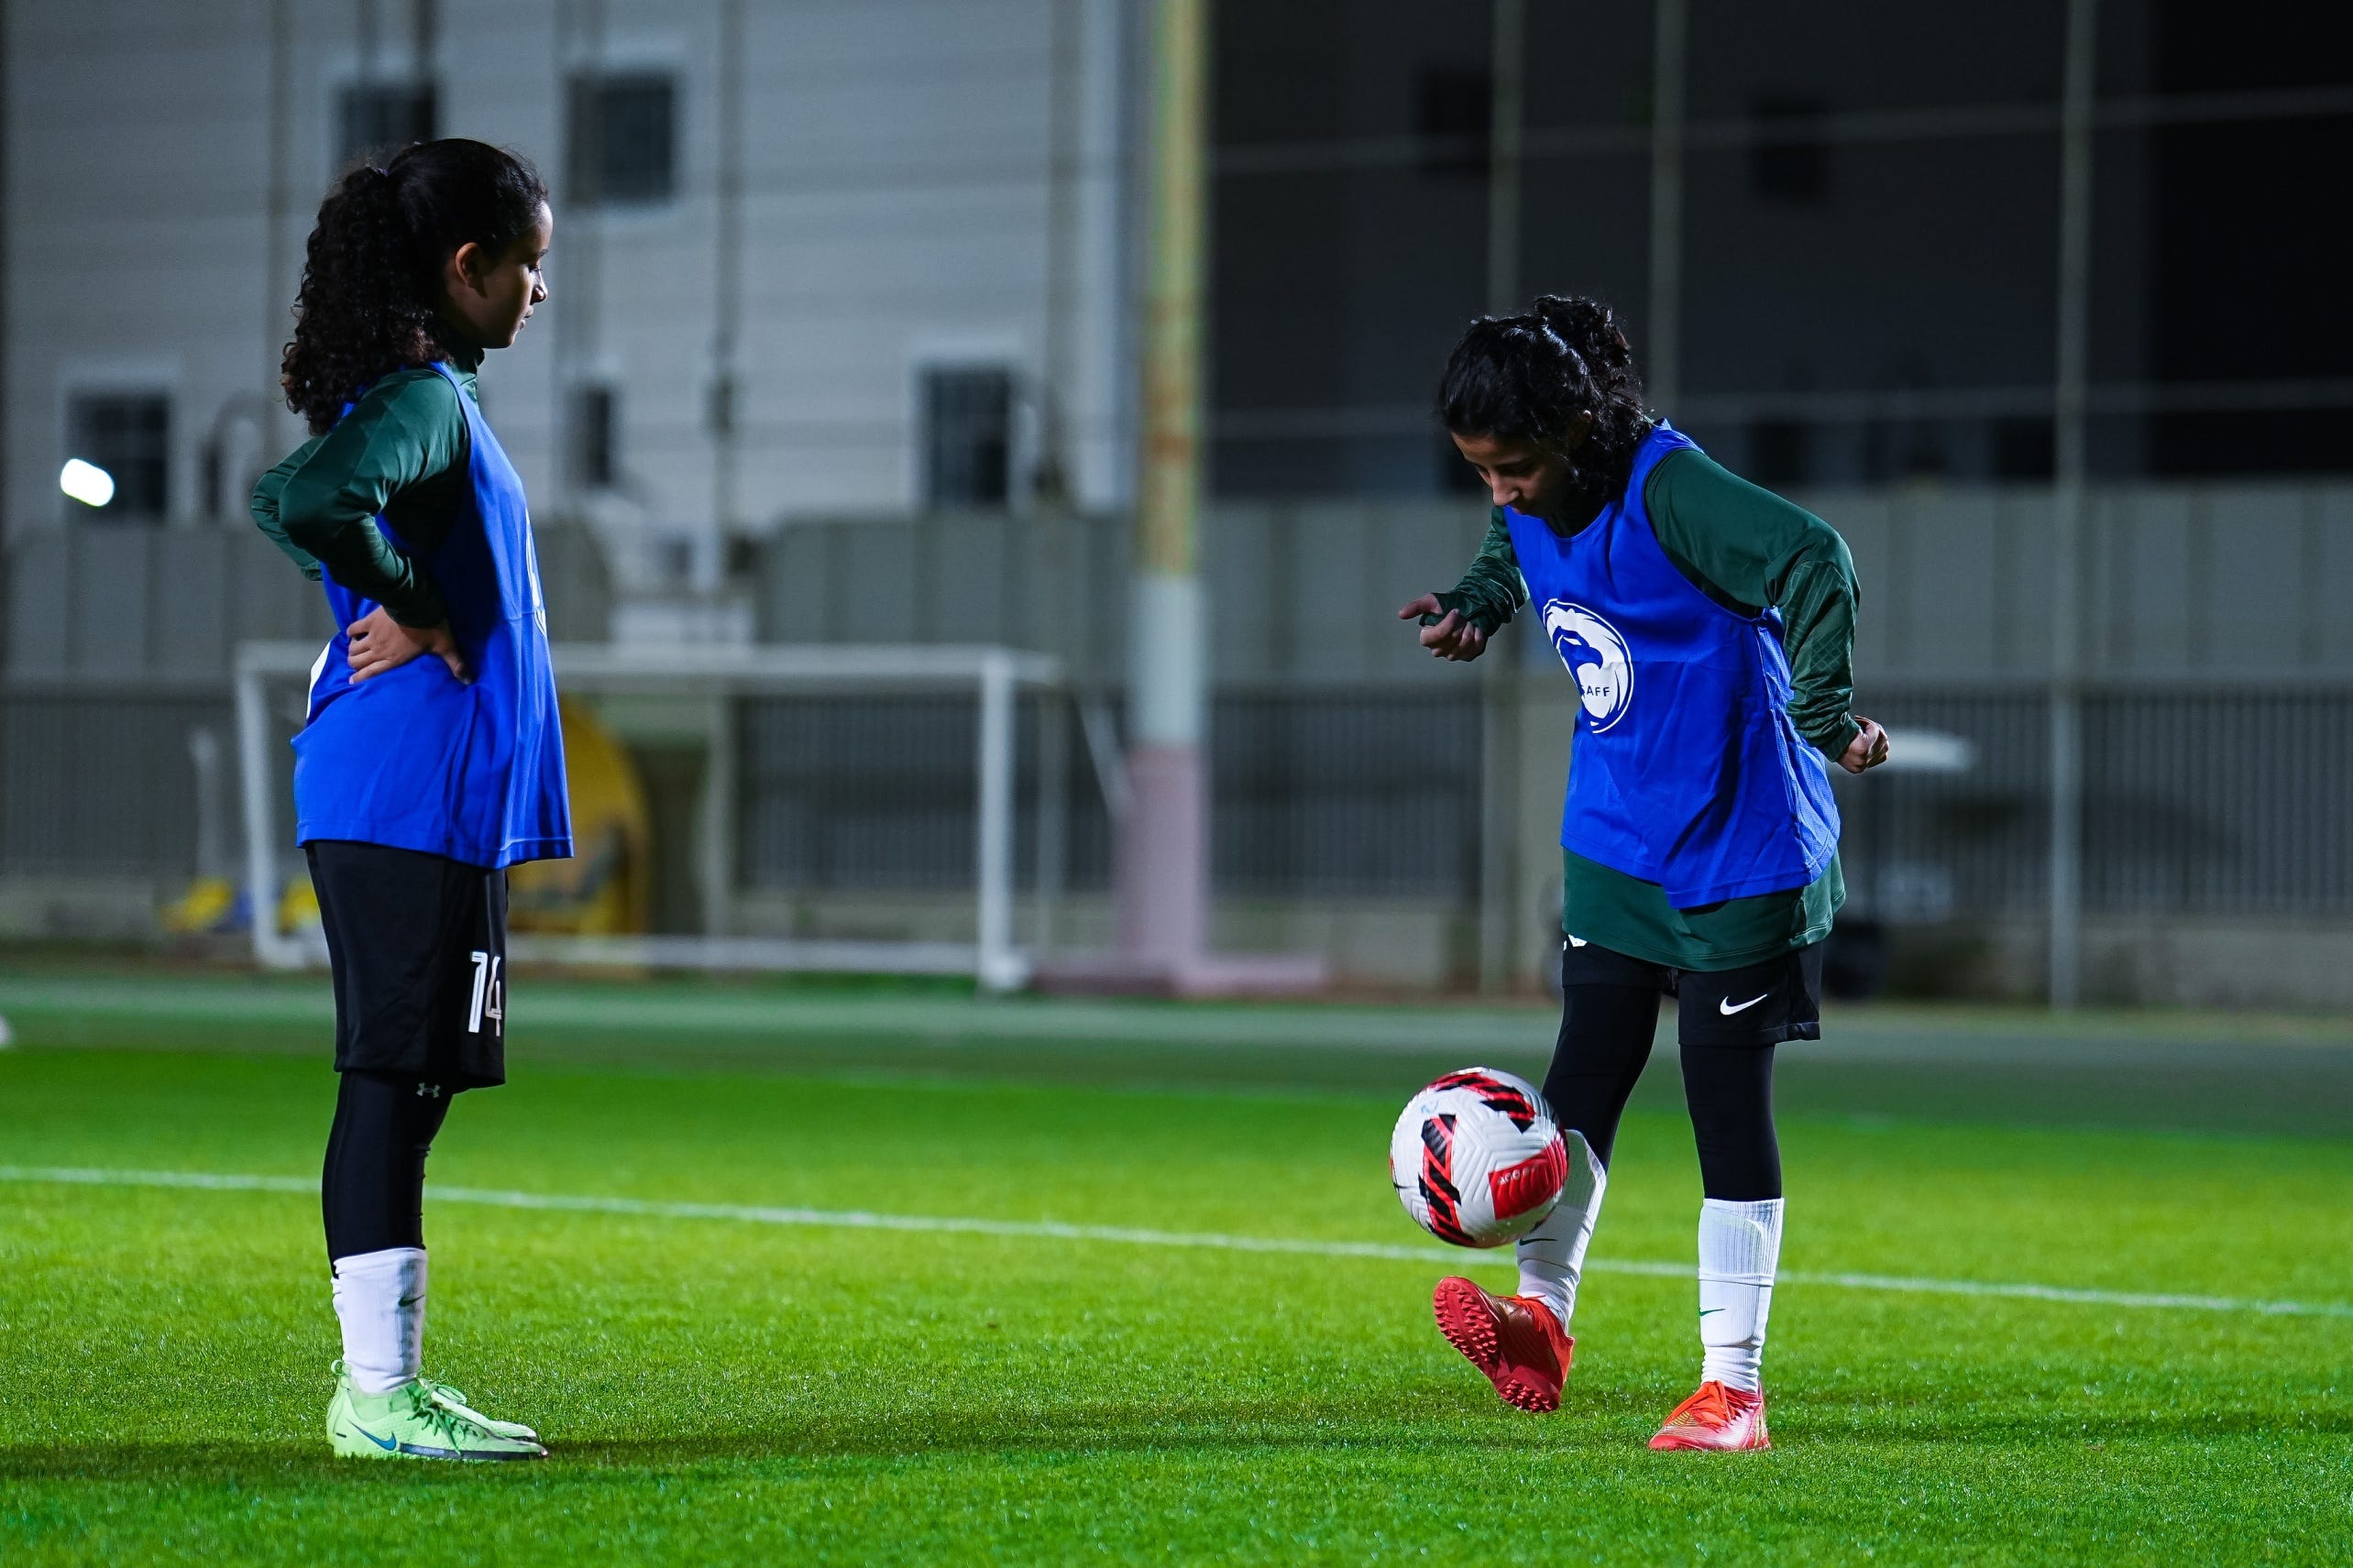 Arabic women's football: supported by the regime, but still